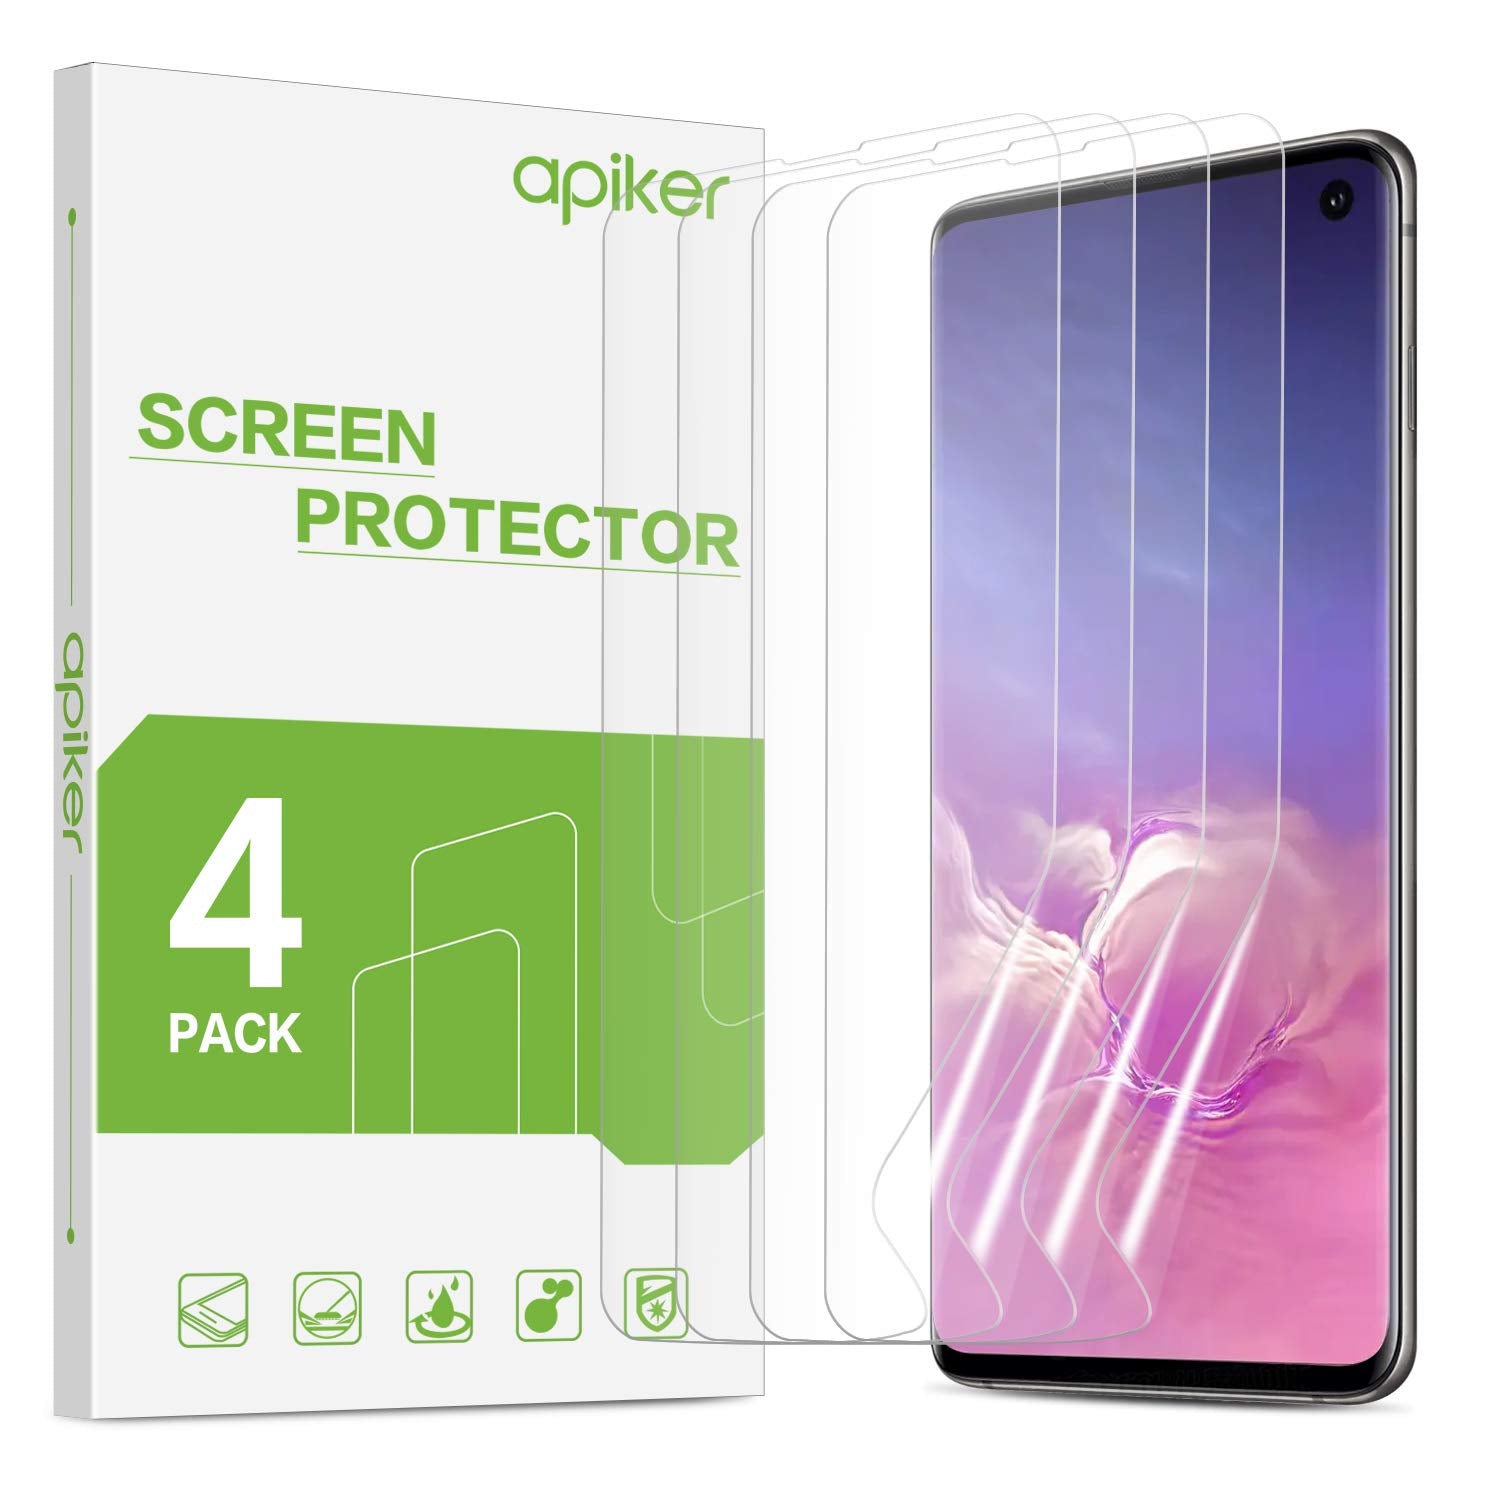 [4 PACK] Screen Protector for Galaxy S10, apiker Upgraded Full Coverage Screen Protector for Samsung Galaxy S10 - HD Clear Film, Case Friendly